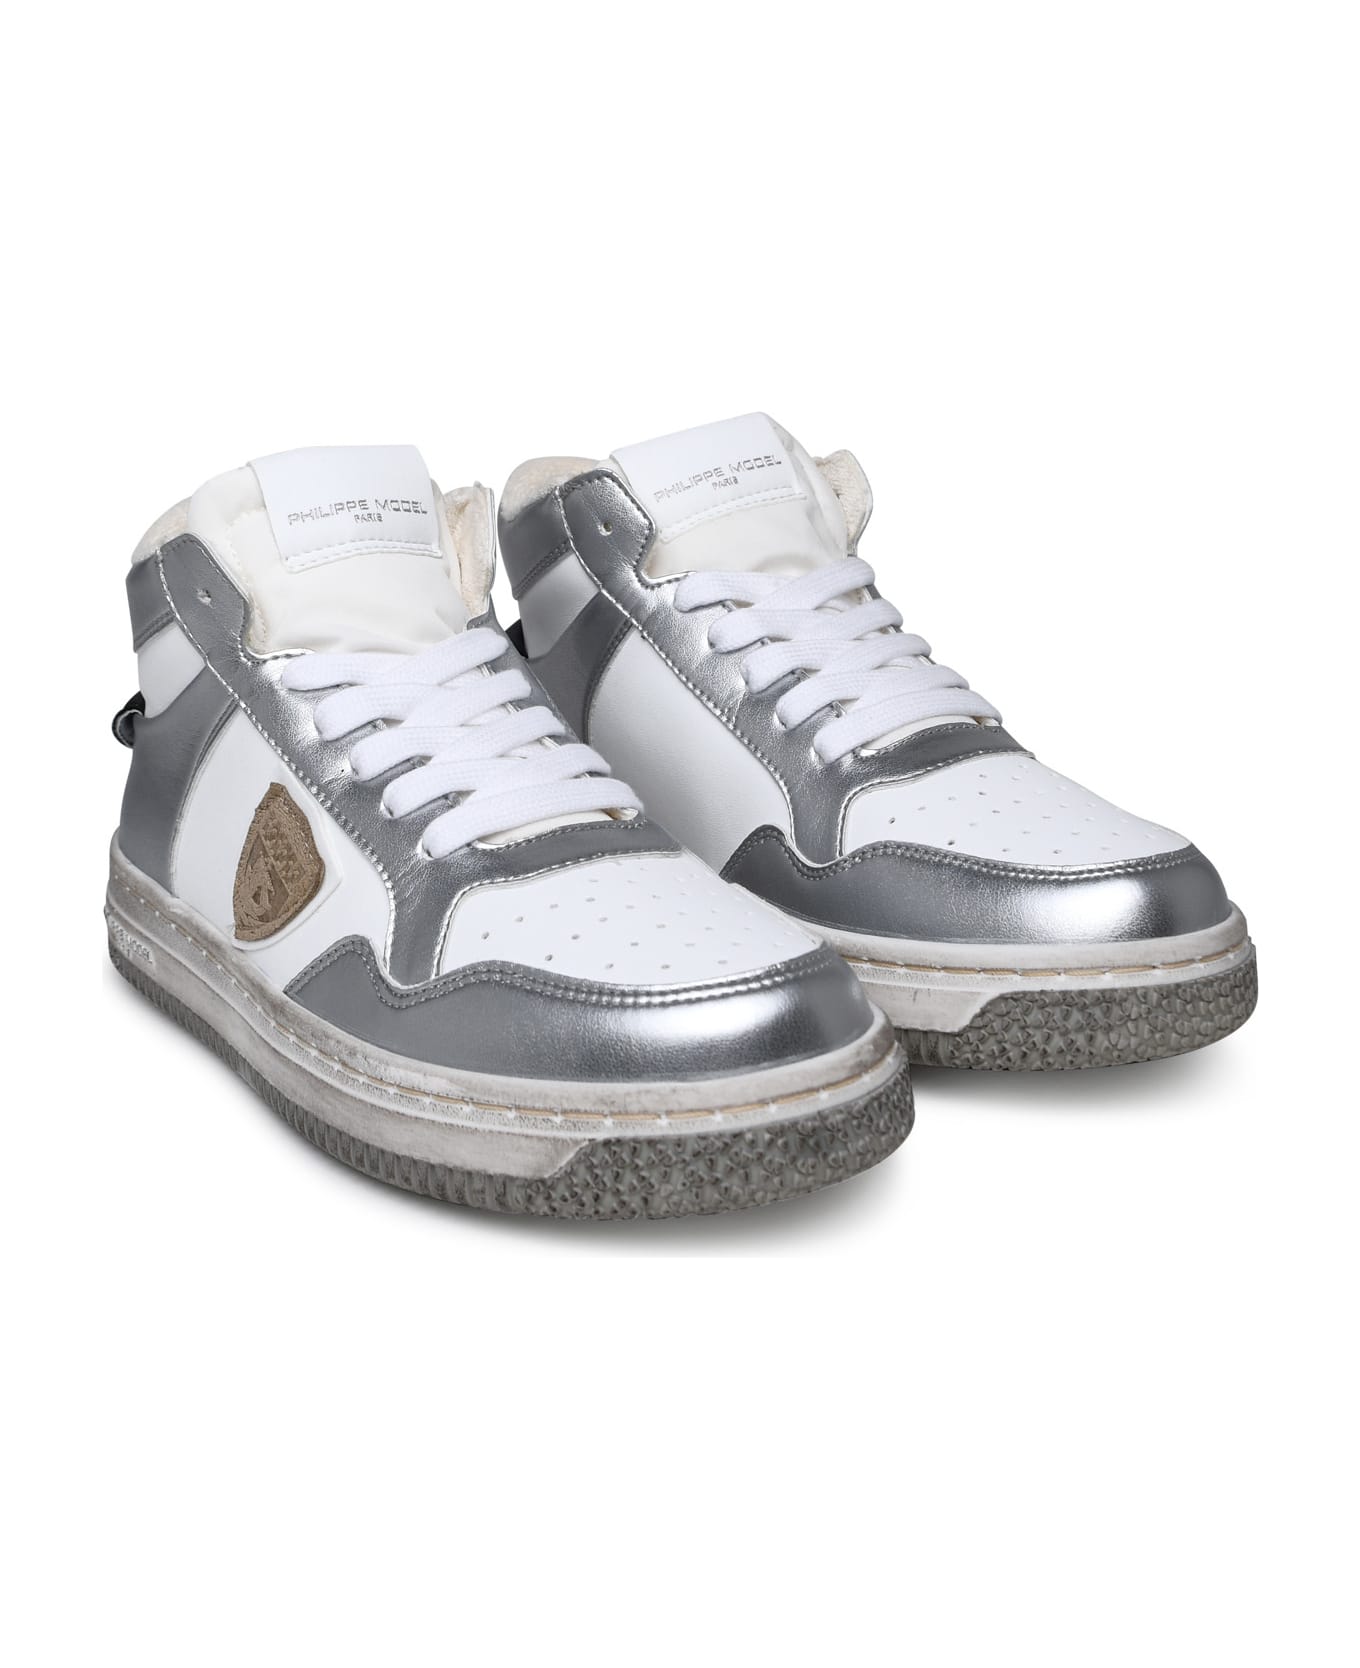 Philippe Model Lion Sneakers In Two-tone Polyurethane Blend - Silver